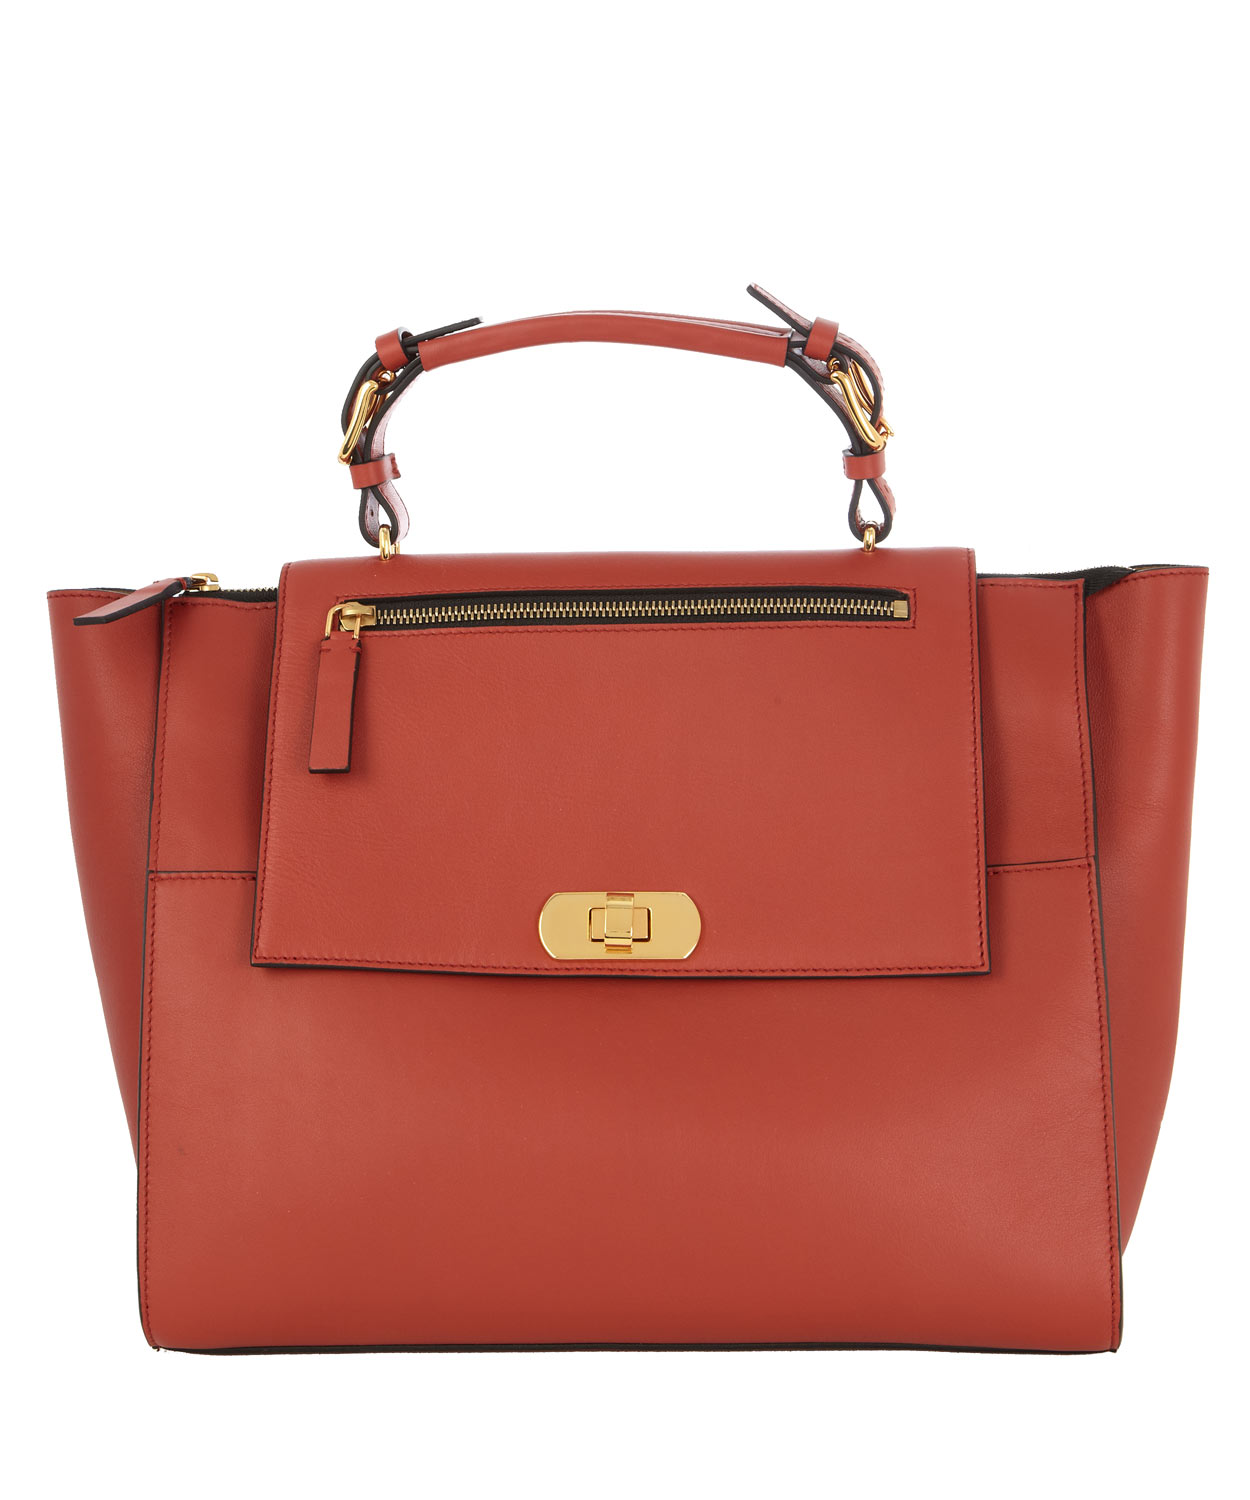 Marni Accessories Rust Leather Tote Bag in Red (rust) | Lyst